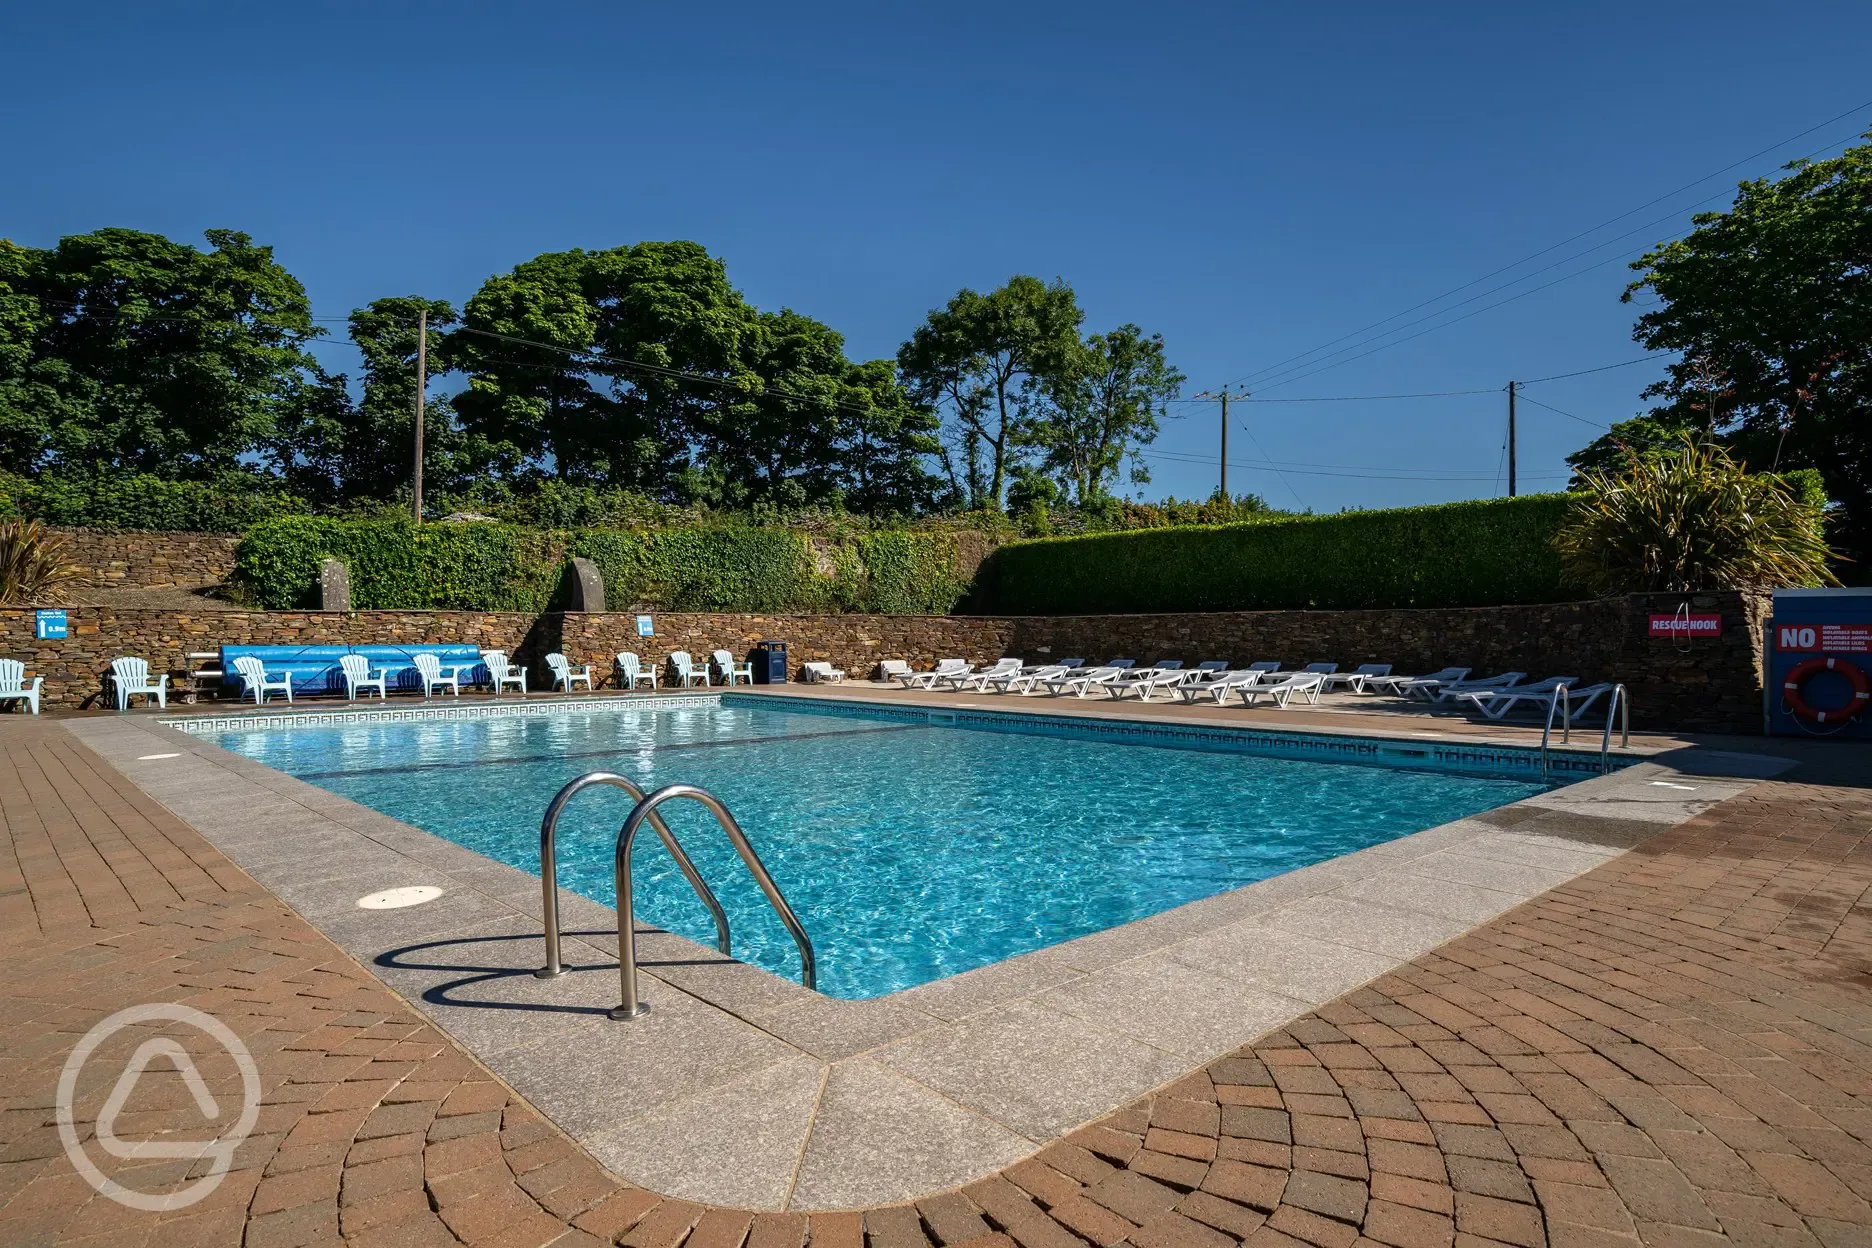 Outdoor swimming pool - open May to late September